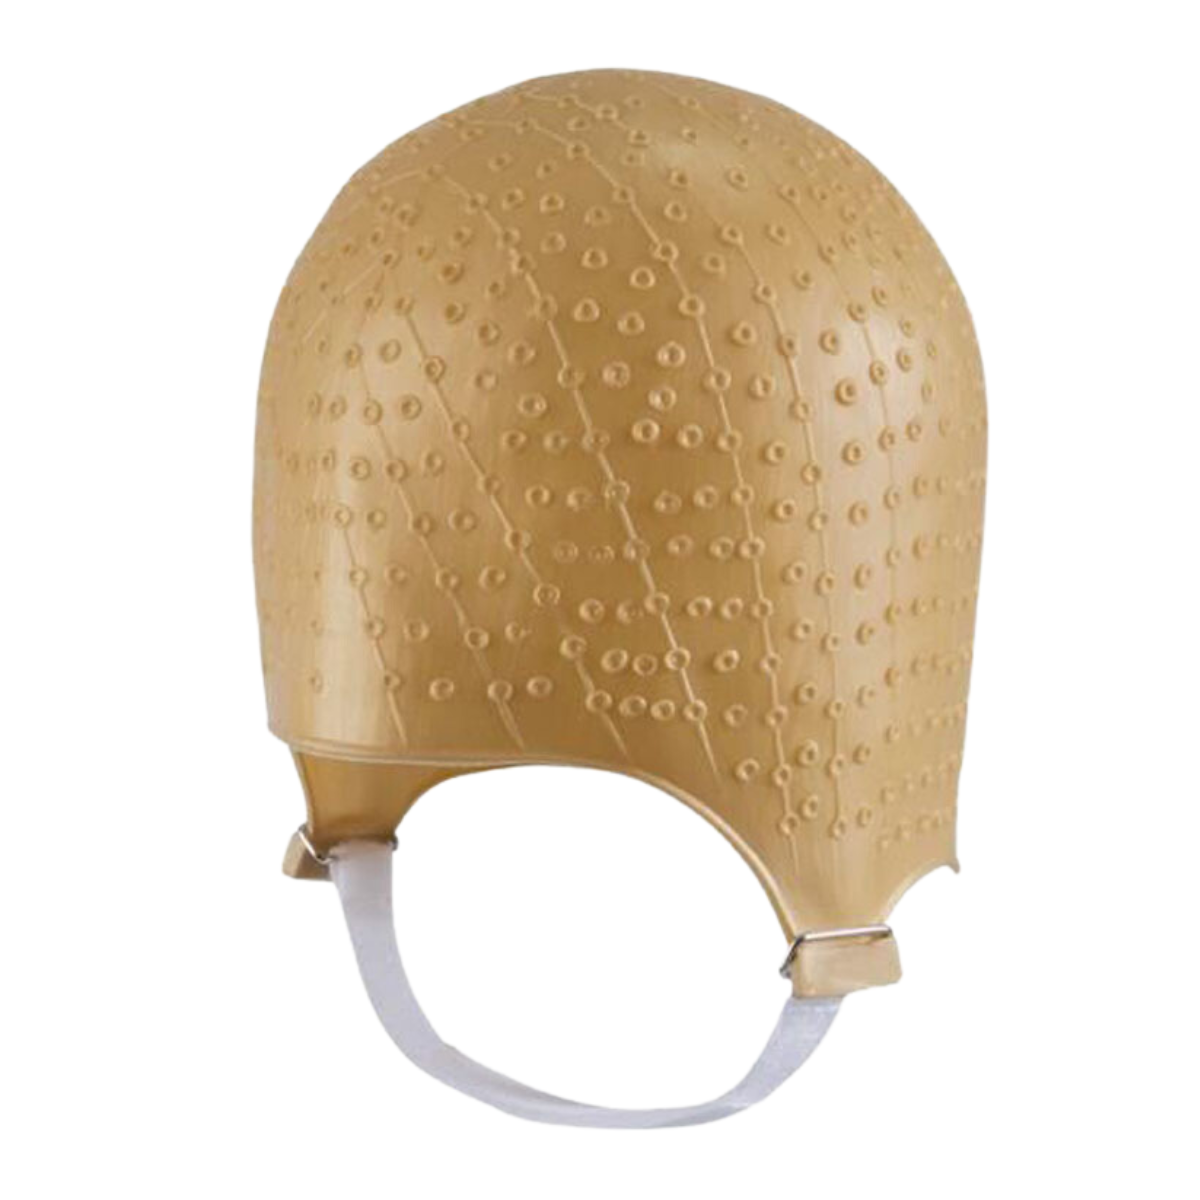 DOMPEL Reusable Professional Silicone Gold Cap with Hook | Special for Hair Dyeing | Model 664-CA - Buy professional cosmetics dedicated to hair removal